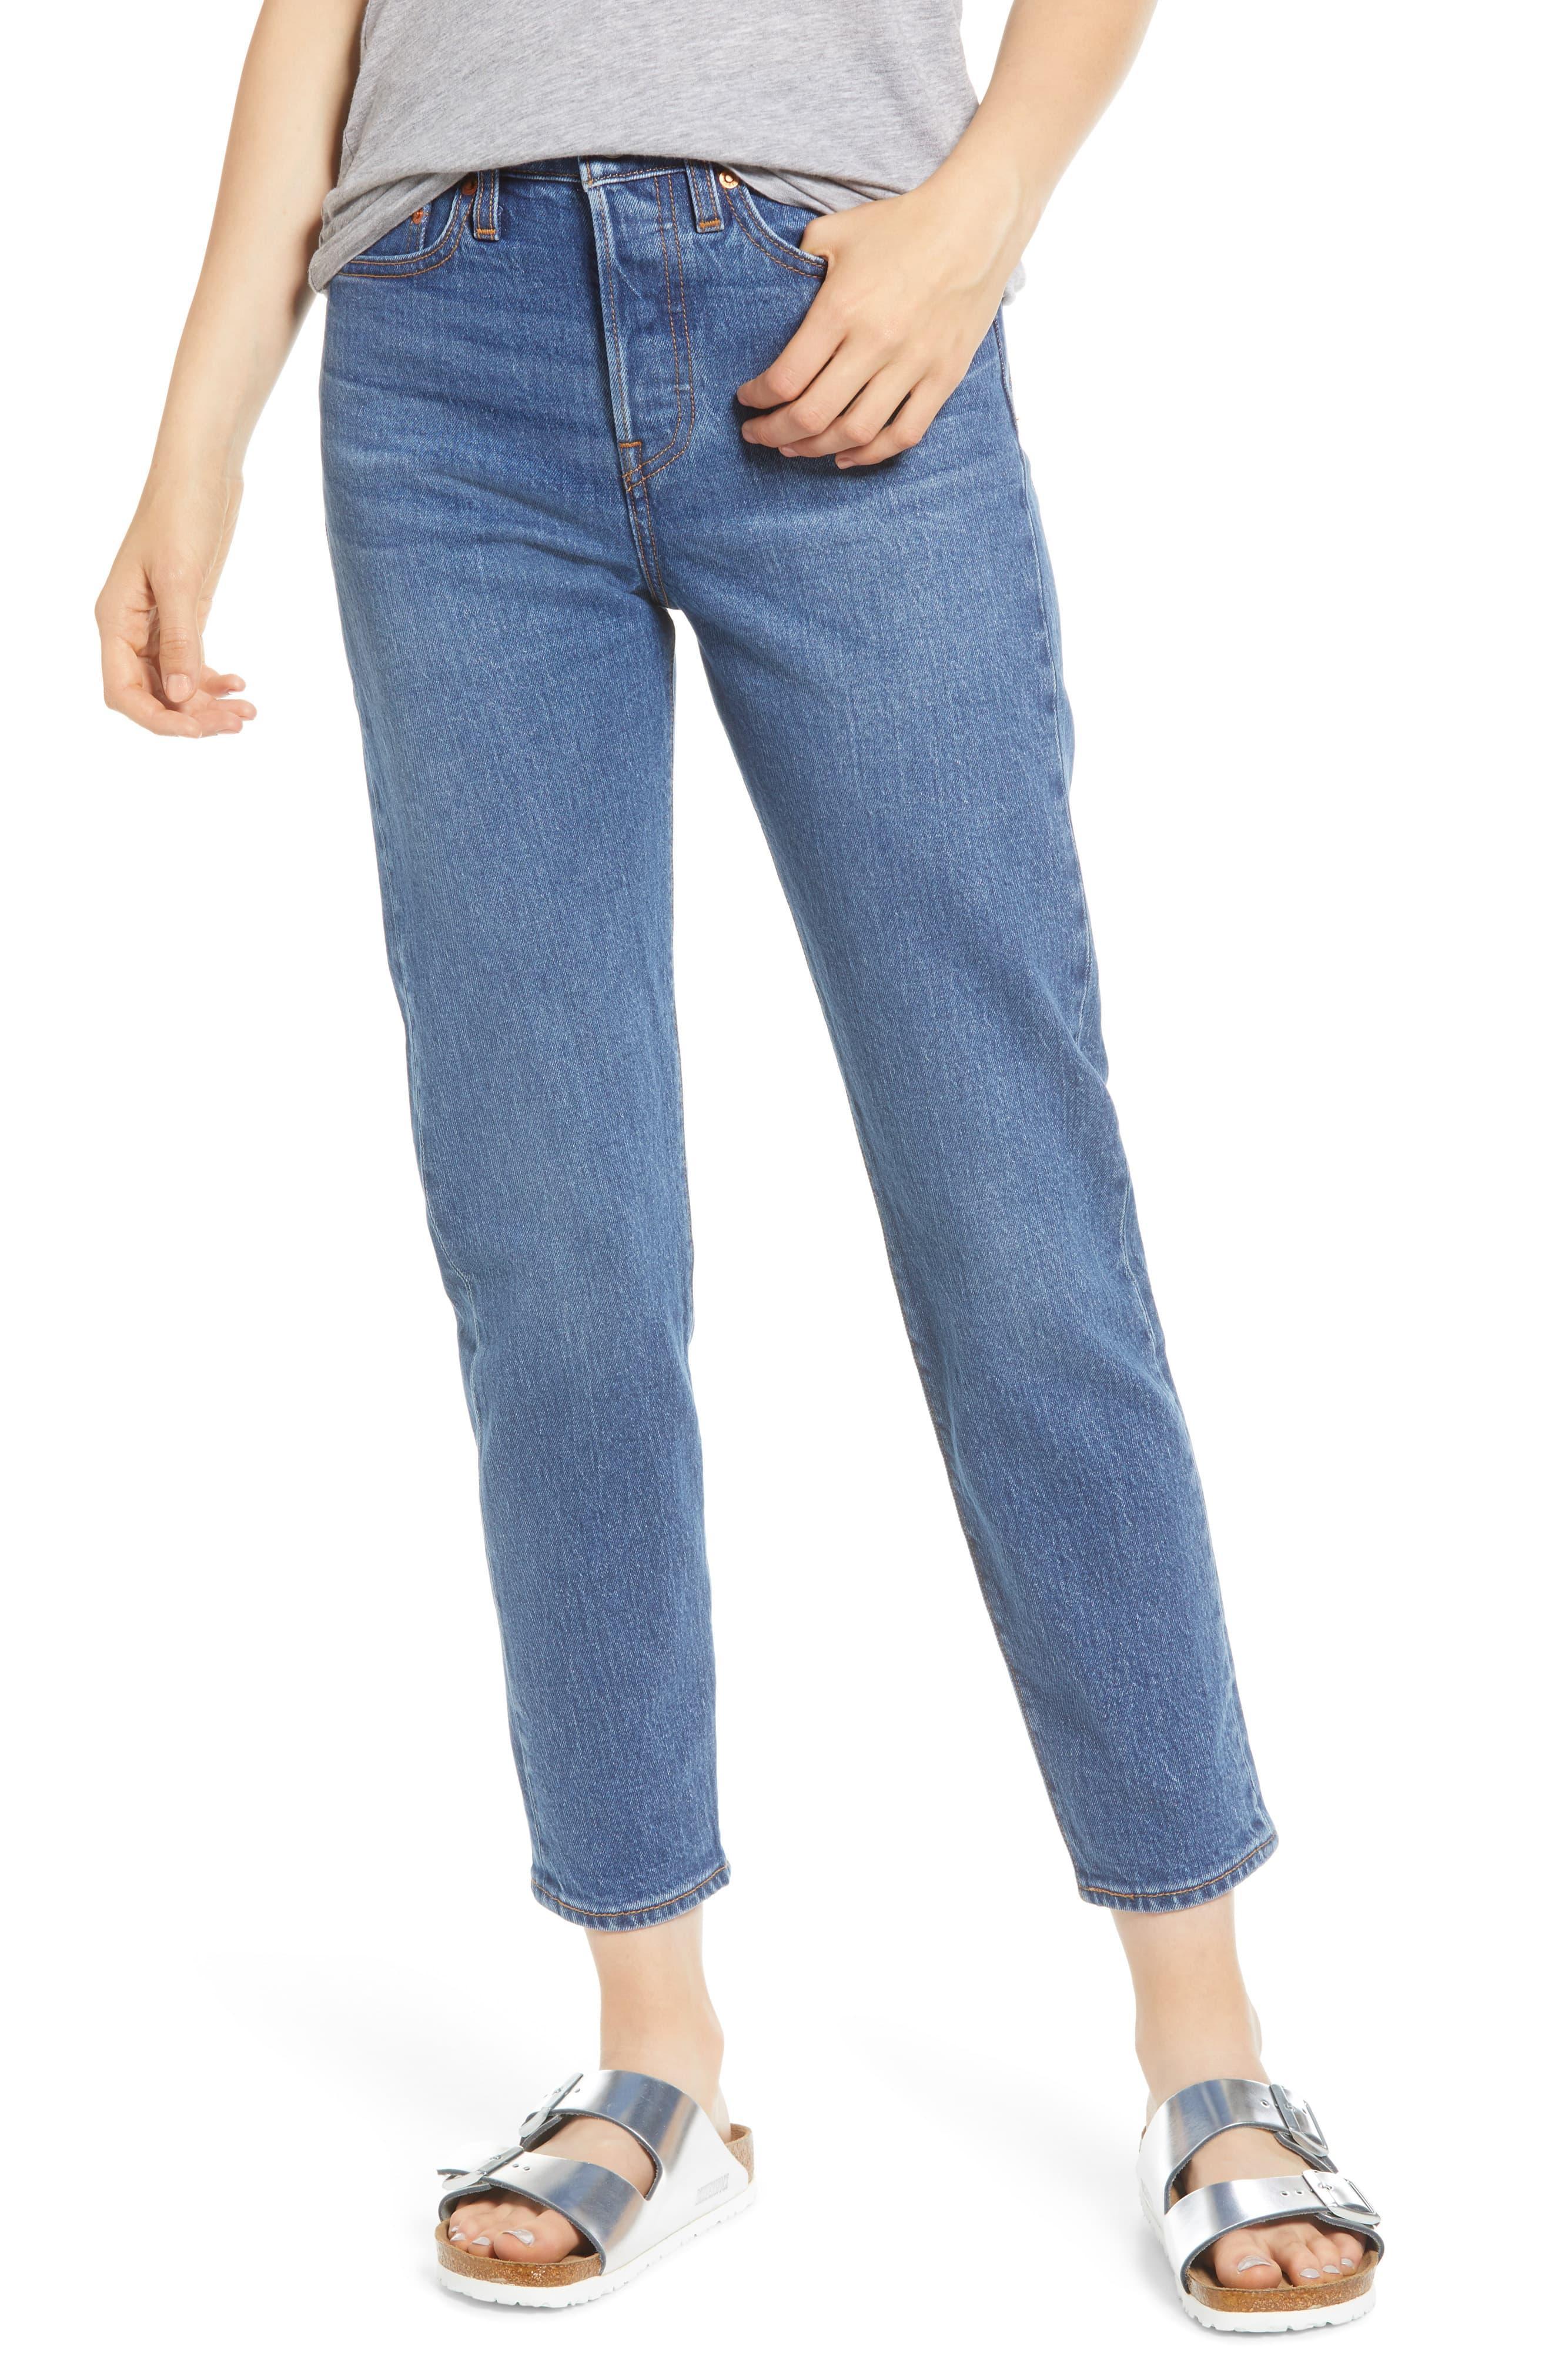 Levi's Denim Wedgie Icon Fit High Waist Ankle Jeans in Blue - Lyst